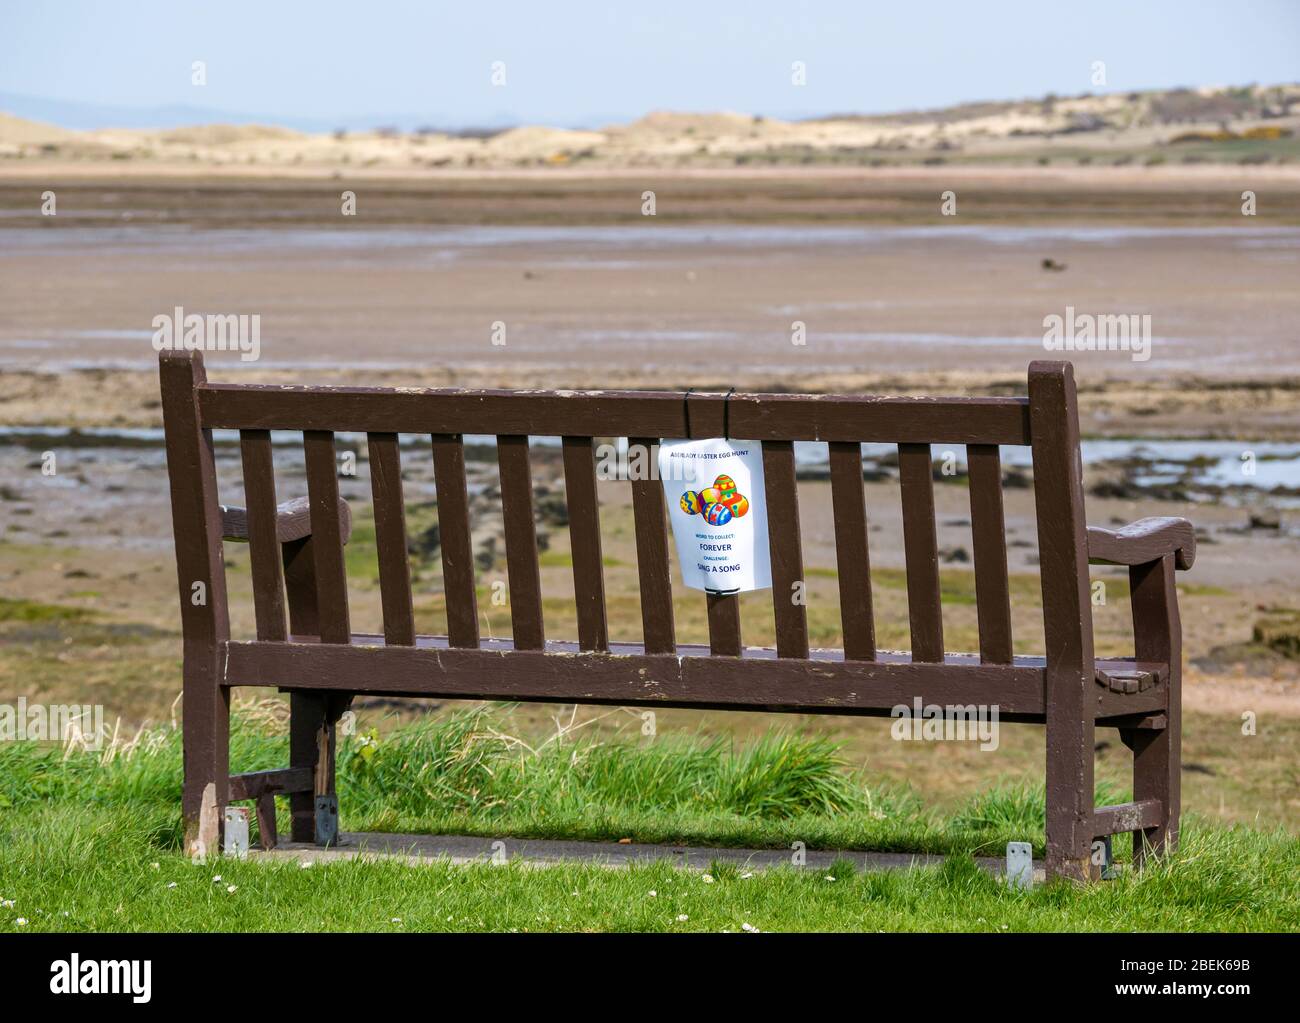 Bench with notice for Aberlady Easter egg hunt during Coronavirus Covid-19 pandemic lockdown, East Lothian, Scotland, UK Stock Photo